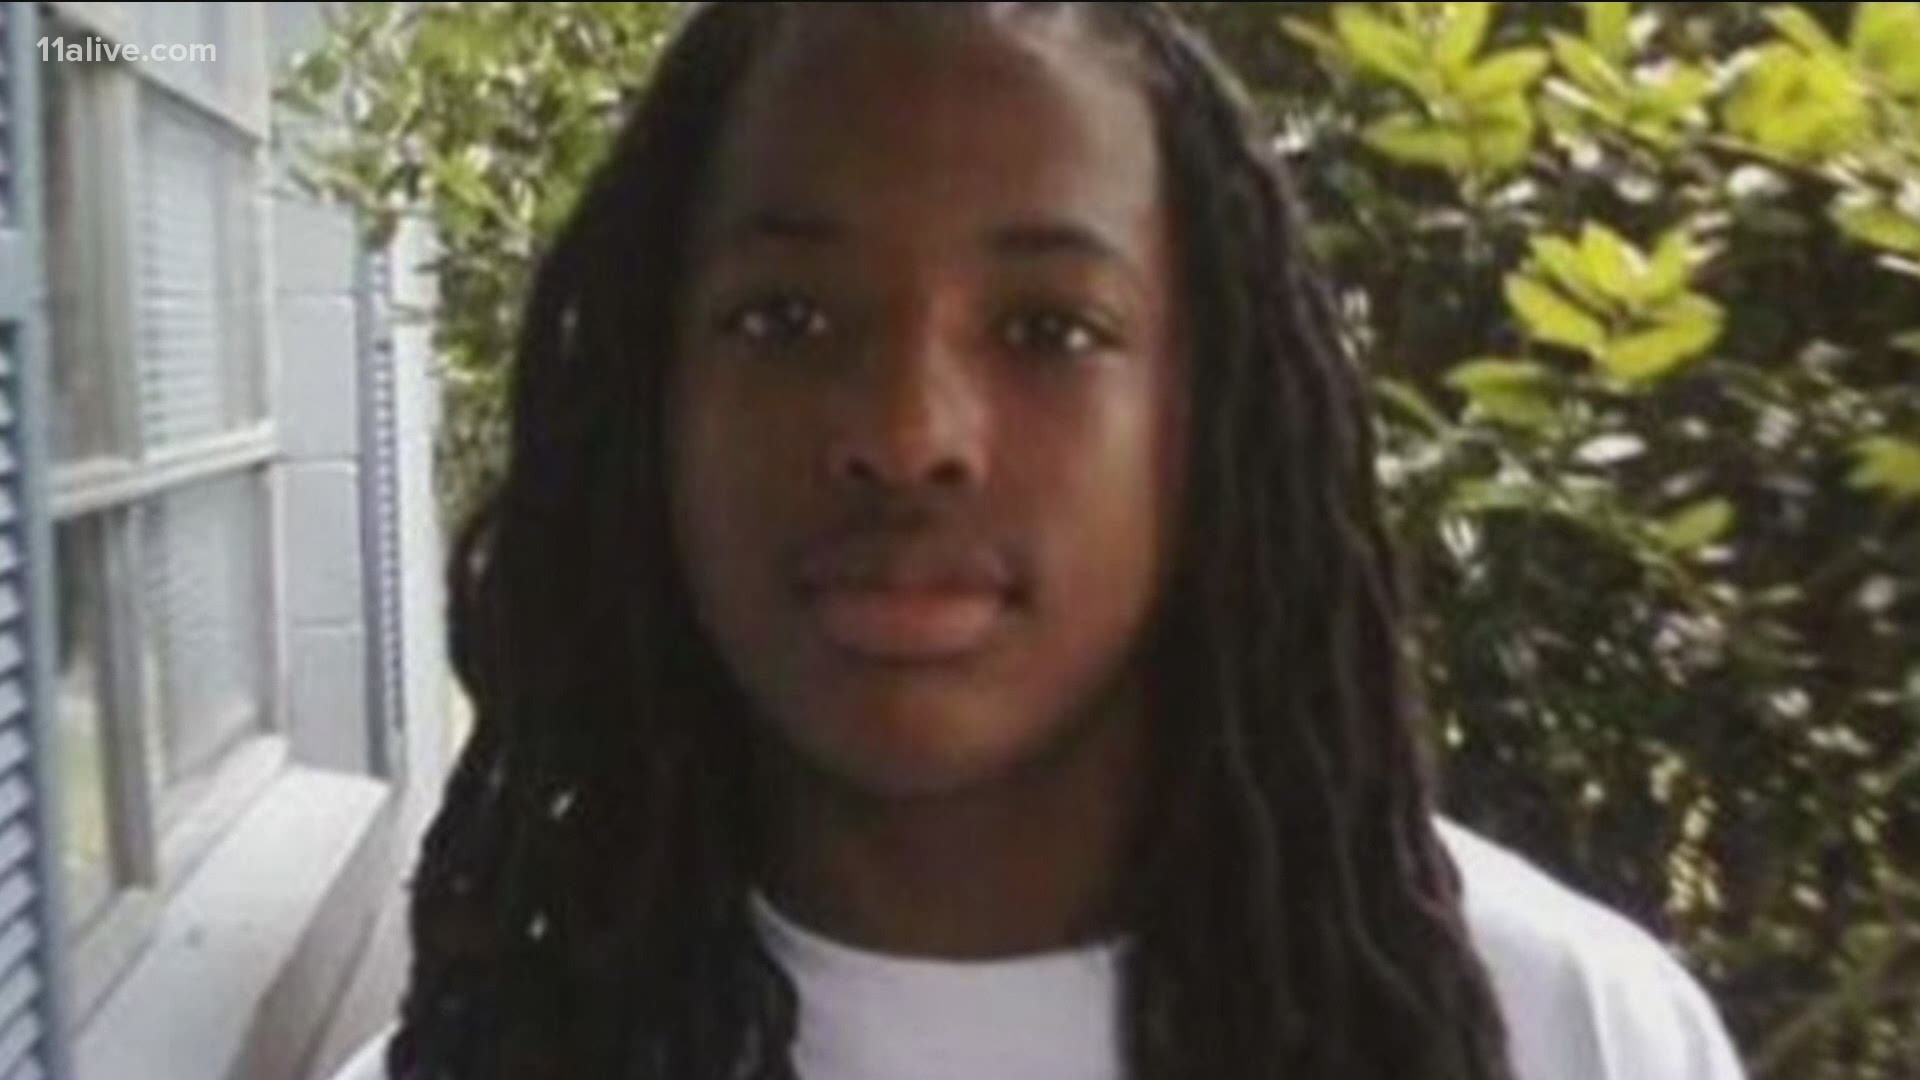 A family spokesperson says it’s a step in the right direction, and hope results show what they've long suspected: something insidious happened to Kendrick Johnson.